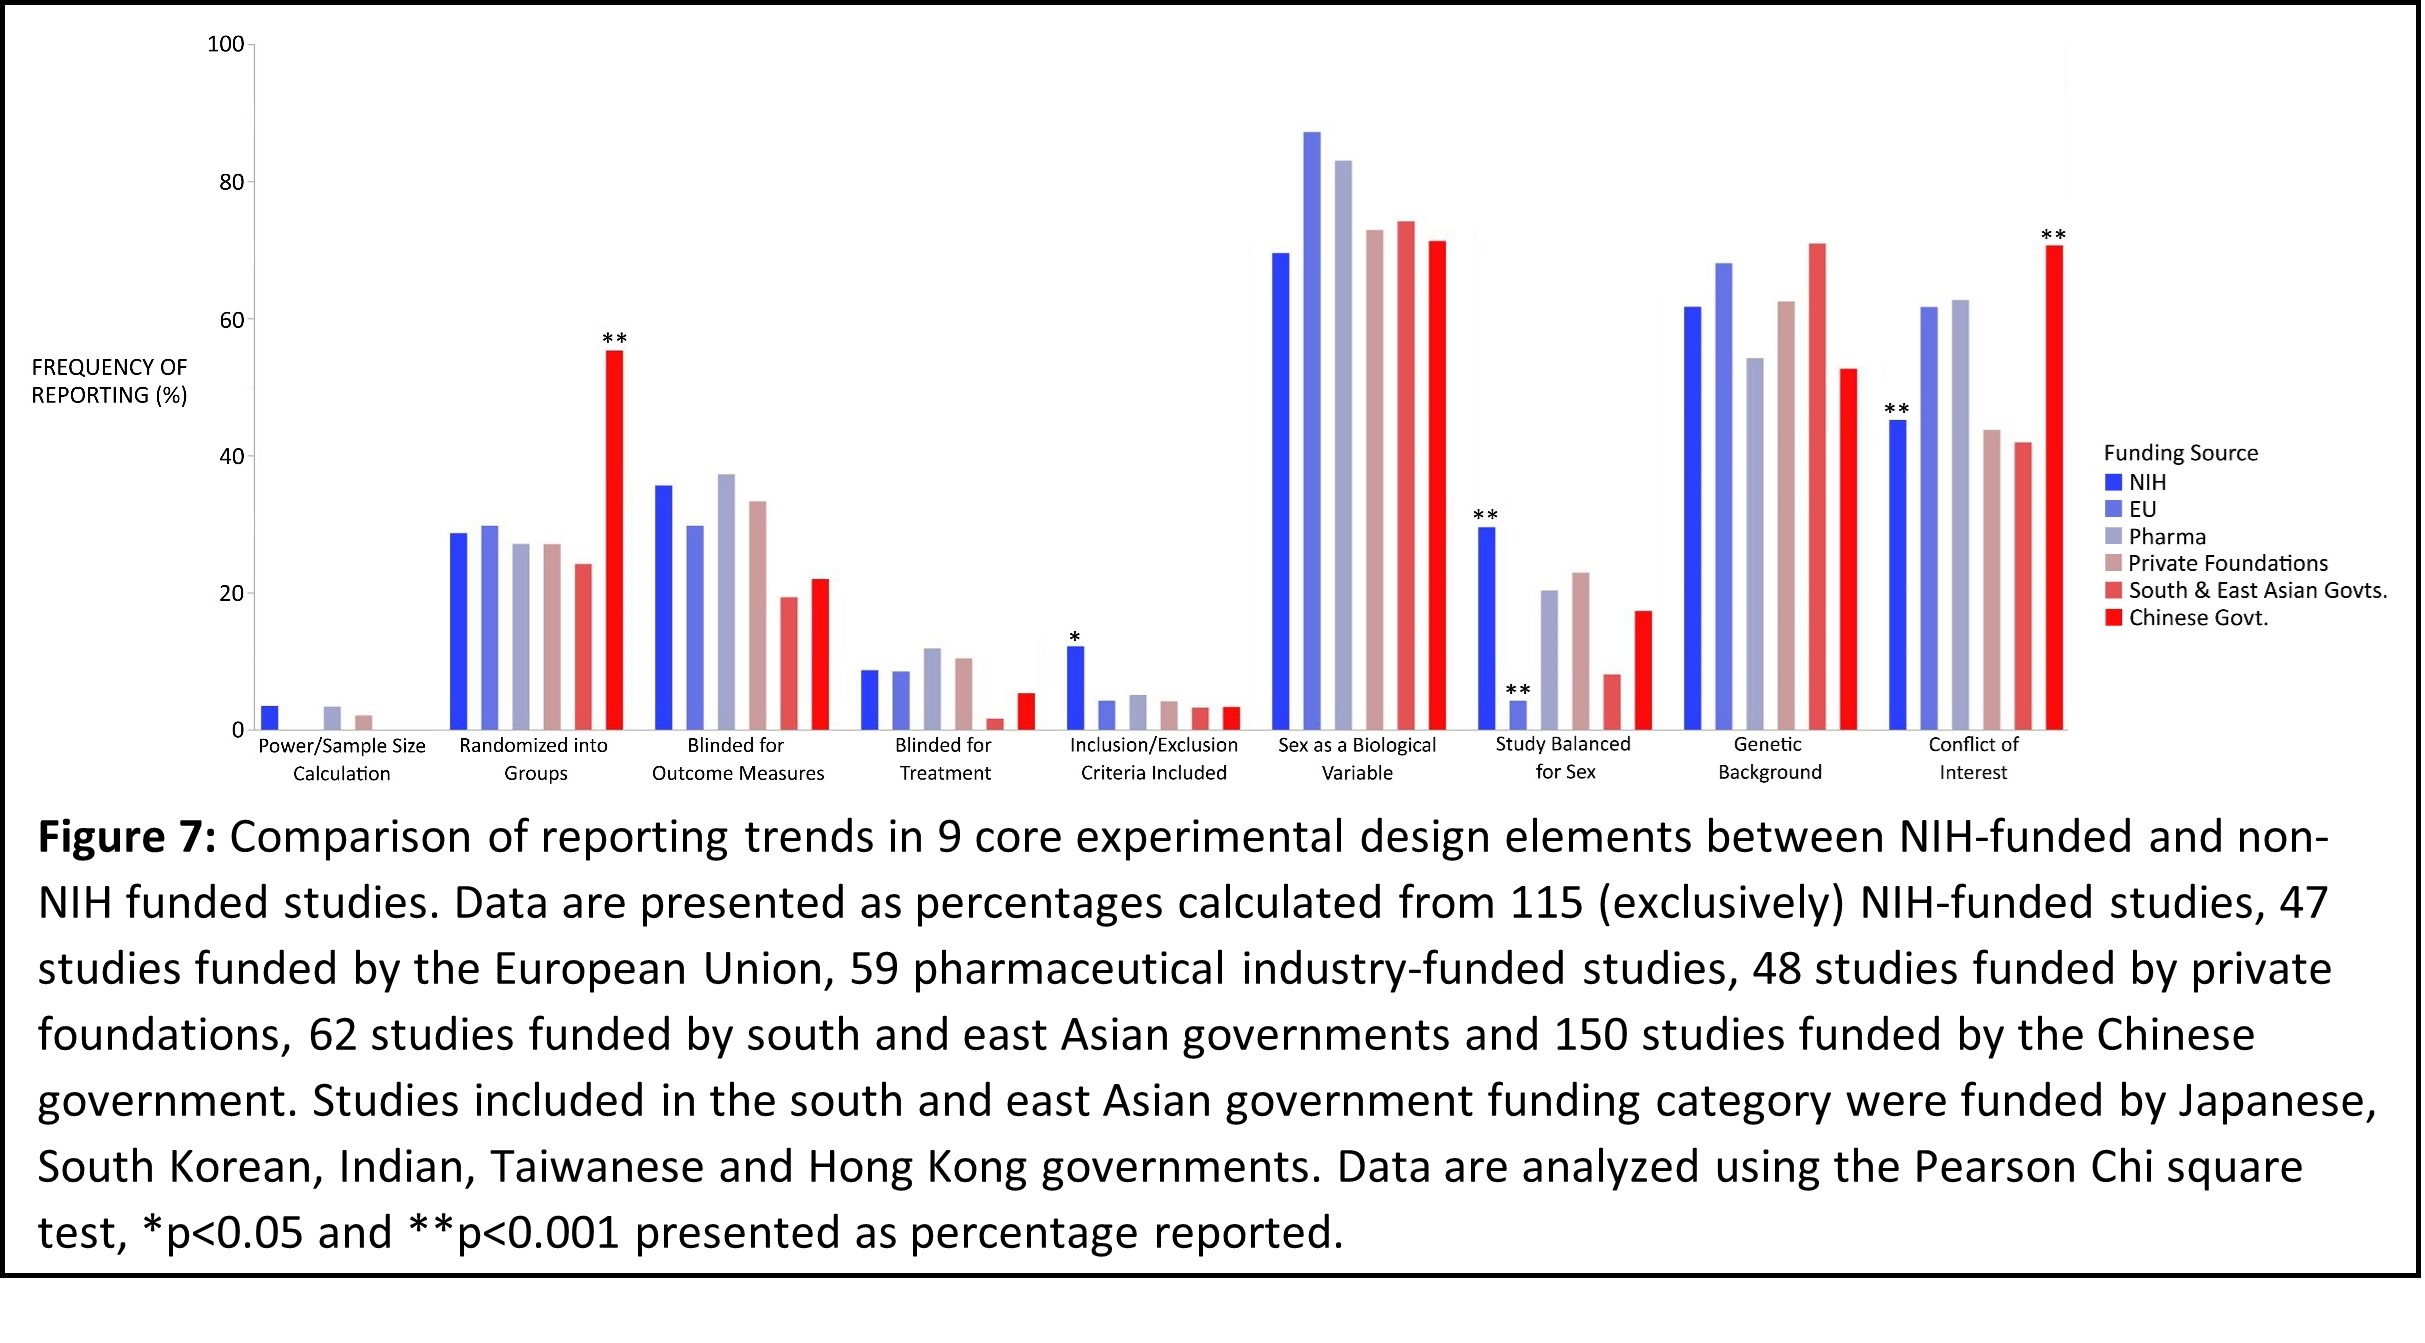 Graph shows reporting of 9 core experimental design elements based on funding source